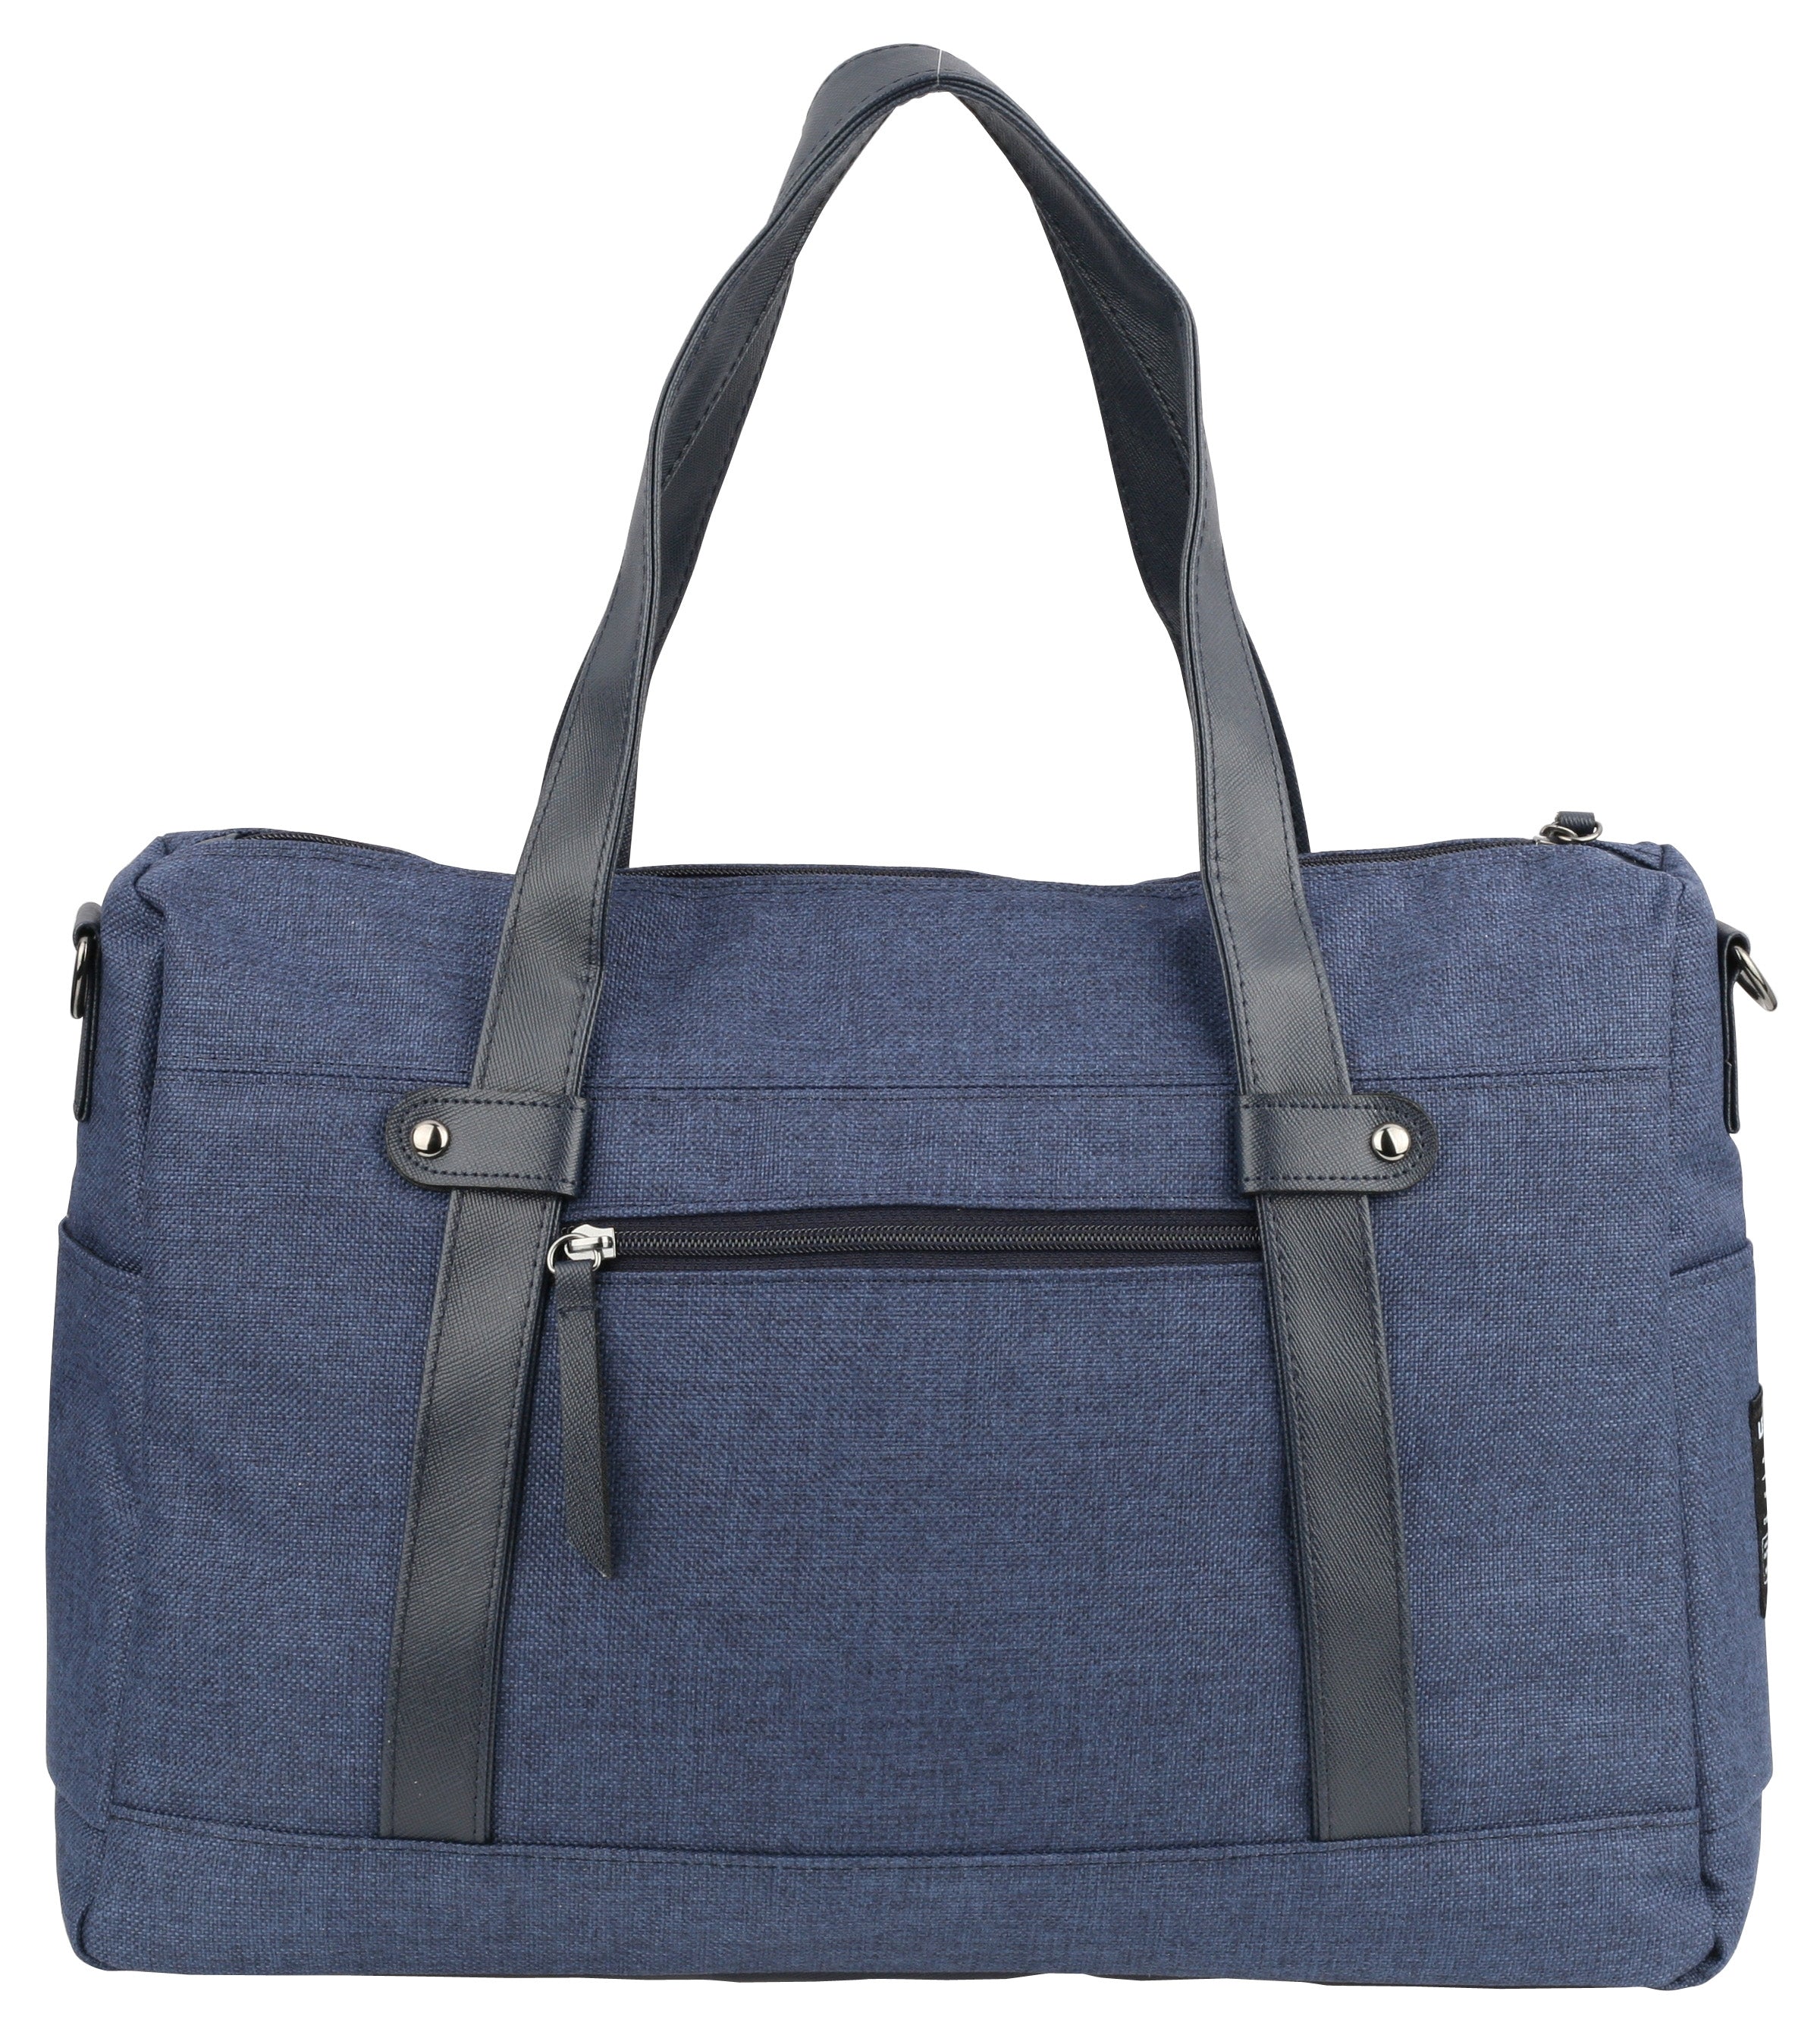 Navy Blue Canvas Totes Cross Body Bags